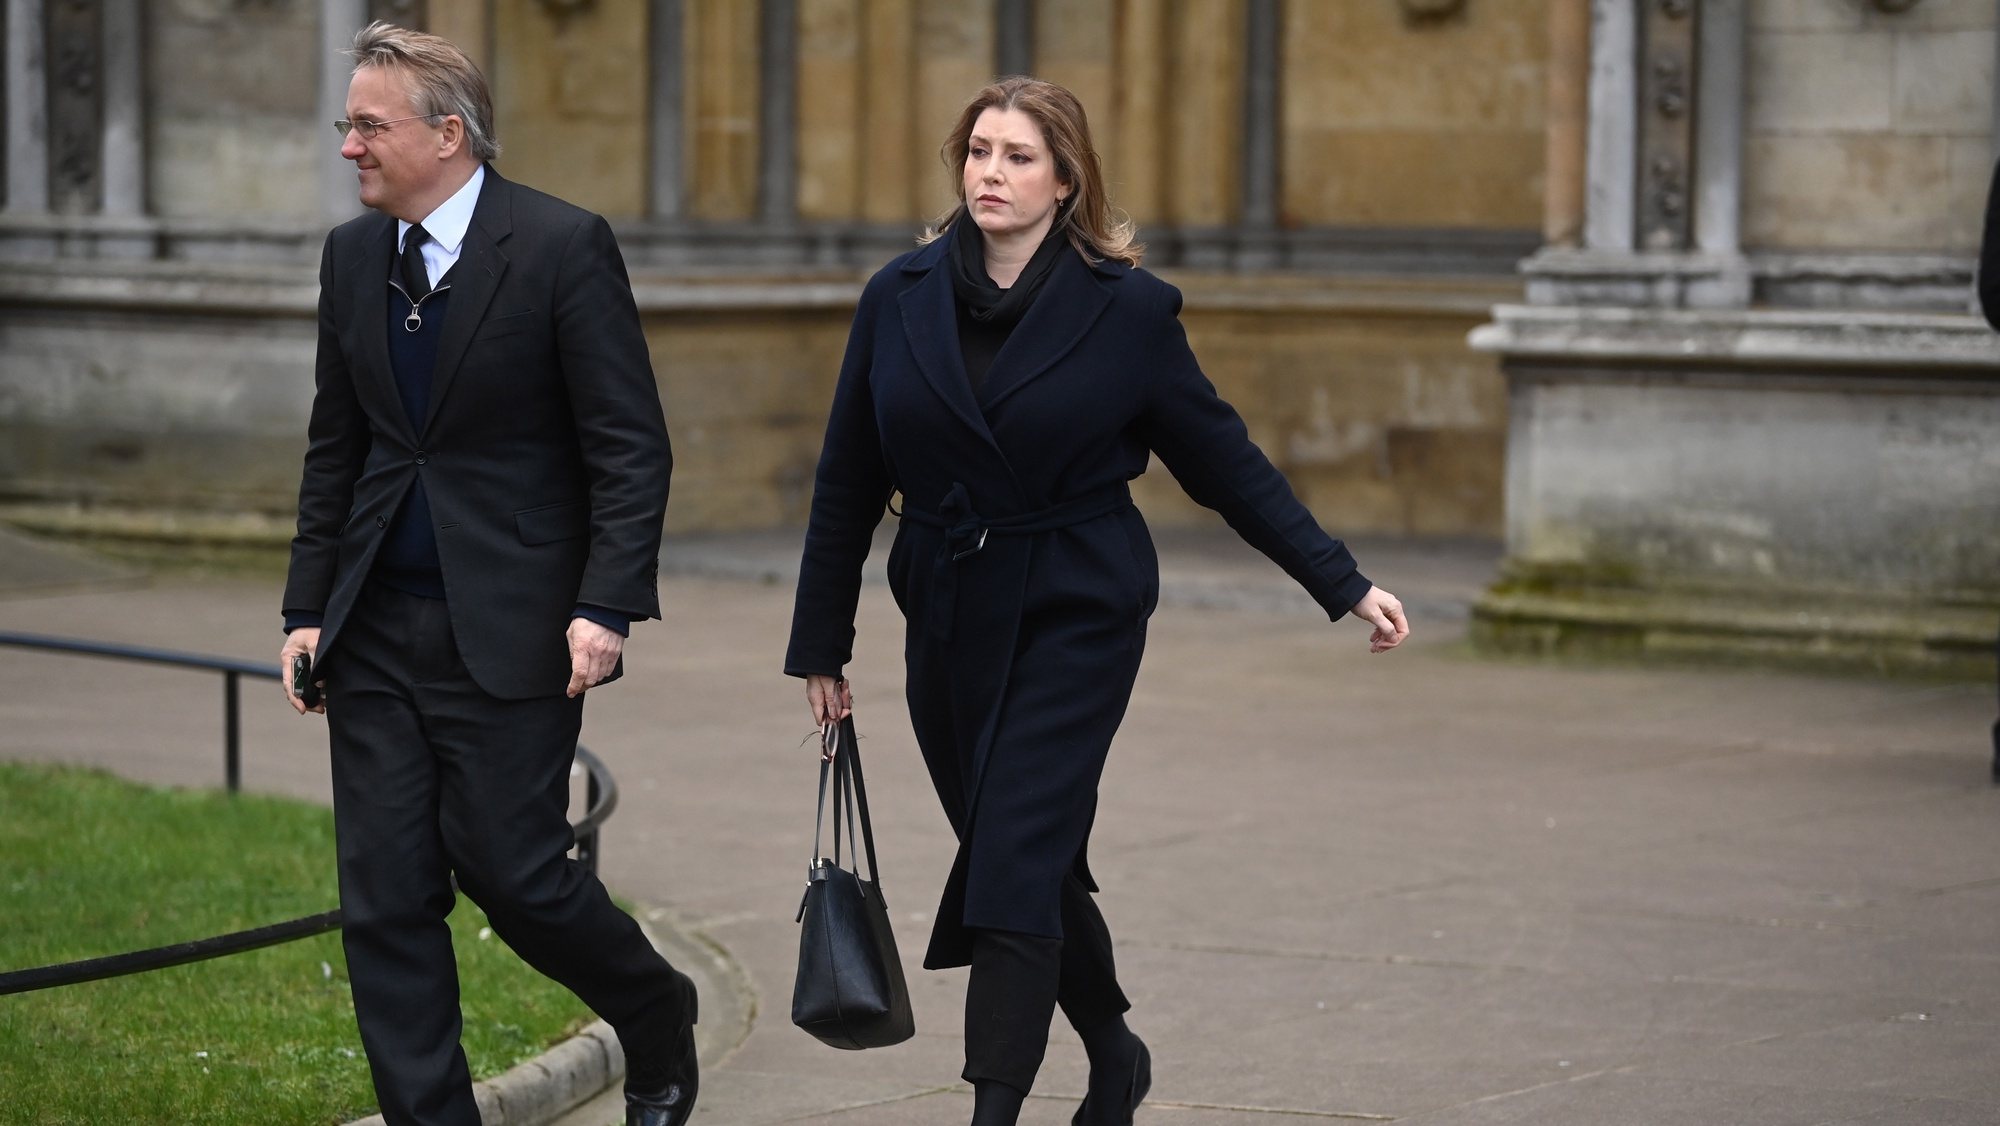 epa09720006 Conservative MP Penny Mordaunt (R) attends the funeral of Labour Party MP Jack Dromey at St Margret&#039;s Church in Westminster Abbey in London, Britain, 31 January 2022. Jack Dromey, was Member of Parliament for Birmingham Erdington and died at his flat in Birmingham on 07 January 2022.  EPA/NEIL HALL